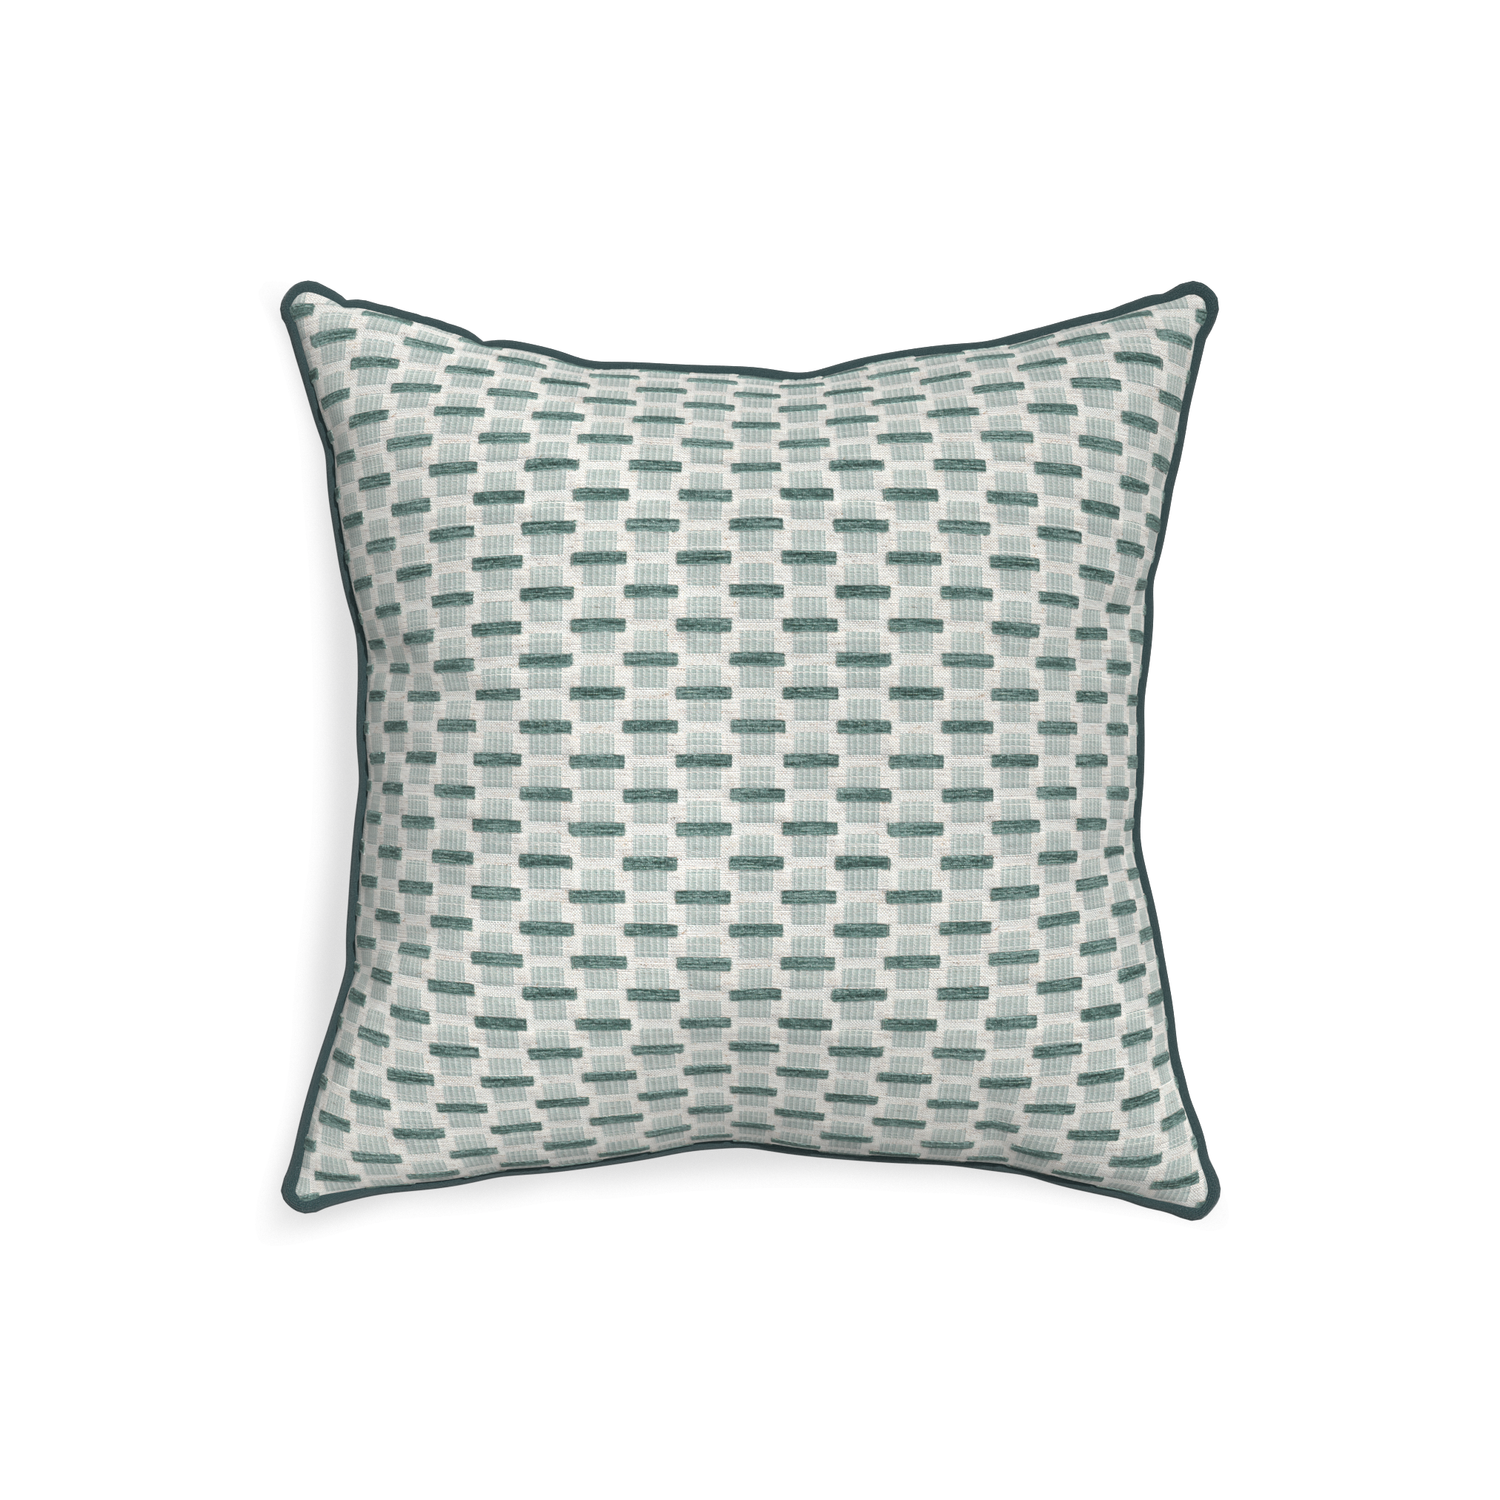 20-square willow mint custom green geometric chenillepillow with p piping on white background